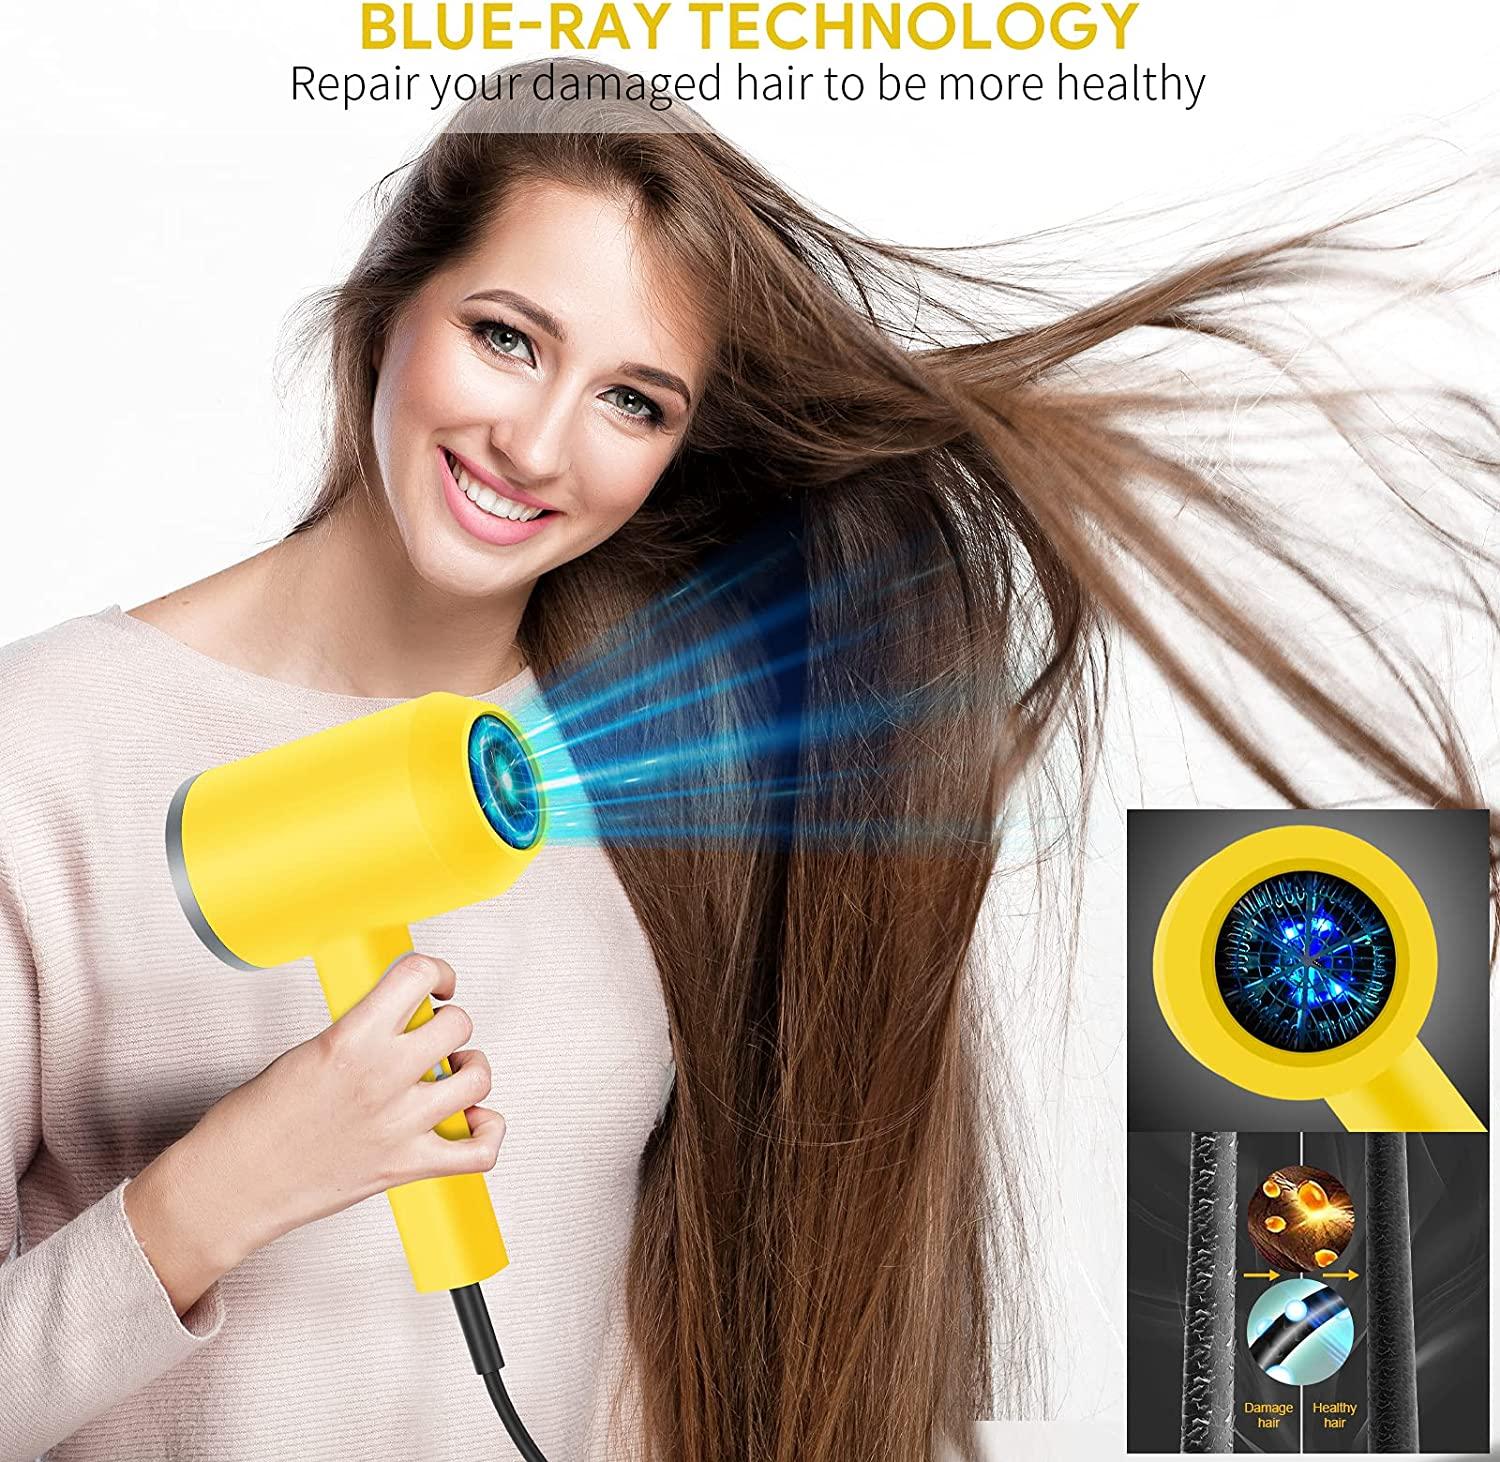 APOKE Hair Dryer with Diffuser, Professional 1800W Blue-ray Ionic Ceramic  Tourmaline Compact Travel Blow Dryer with Comb Attachment, Portable 2  Speed/3 Heat Settings Foldable Small Diffuser Hairdryer Yellow